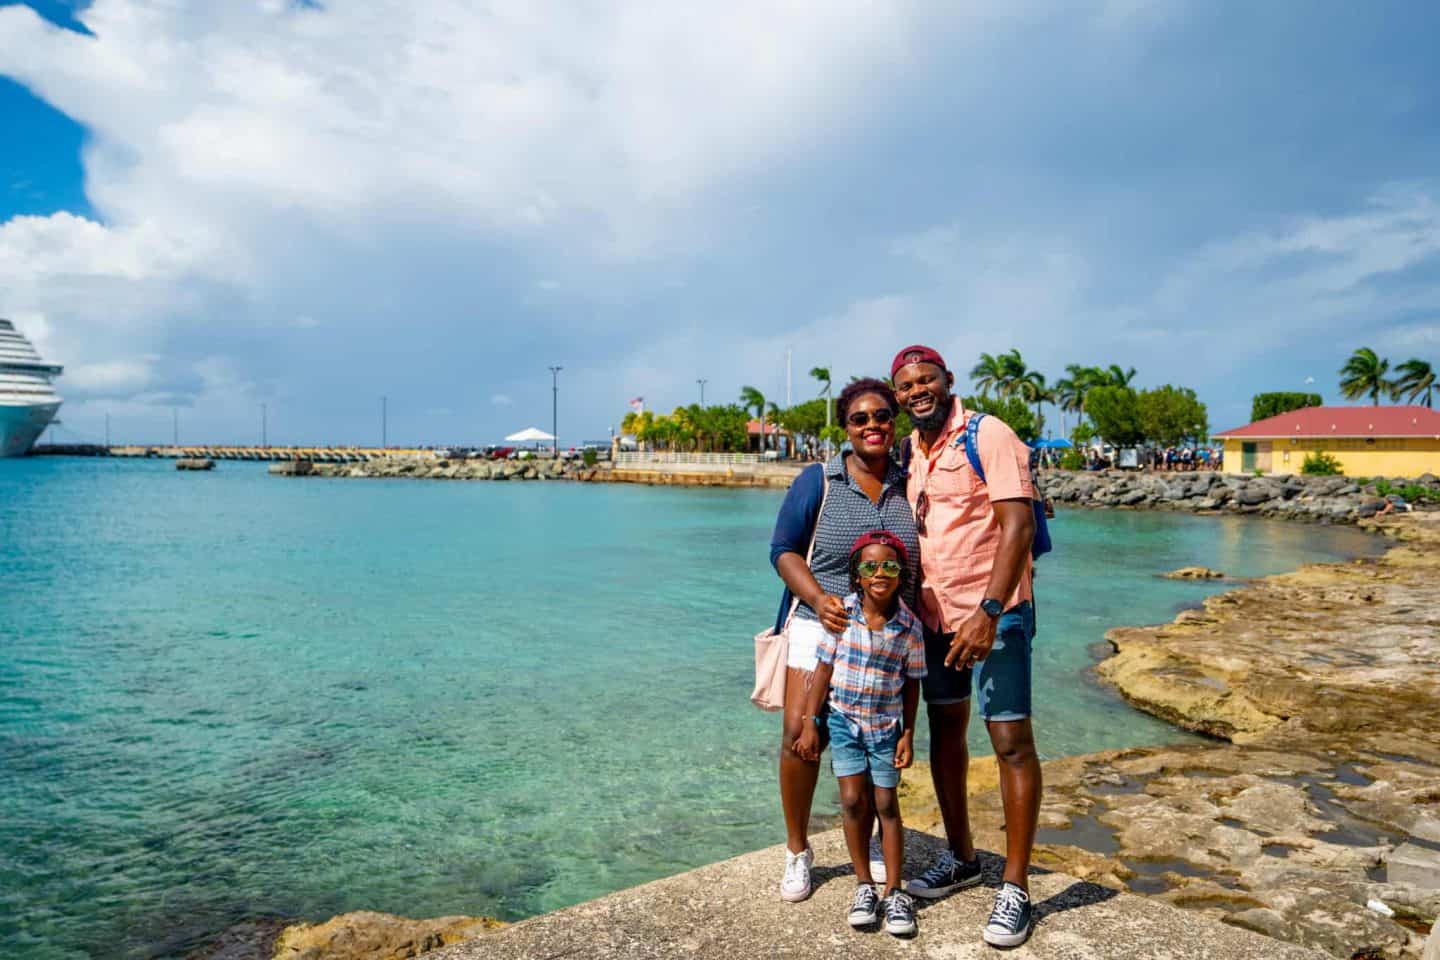 Black Family Travel Things To Do In St Croix Black Family Travel Black Travelers Black Kids Travel Black Family Traveling The World Black Worldschoolers African American Family 57